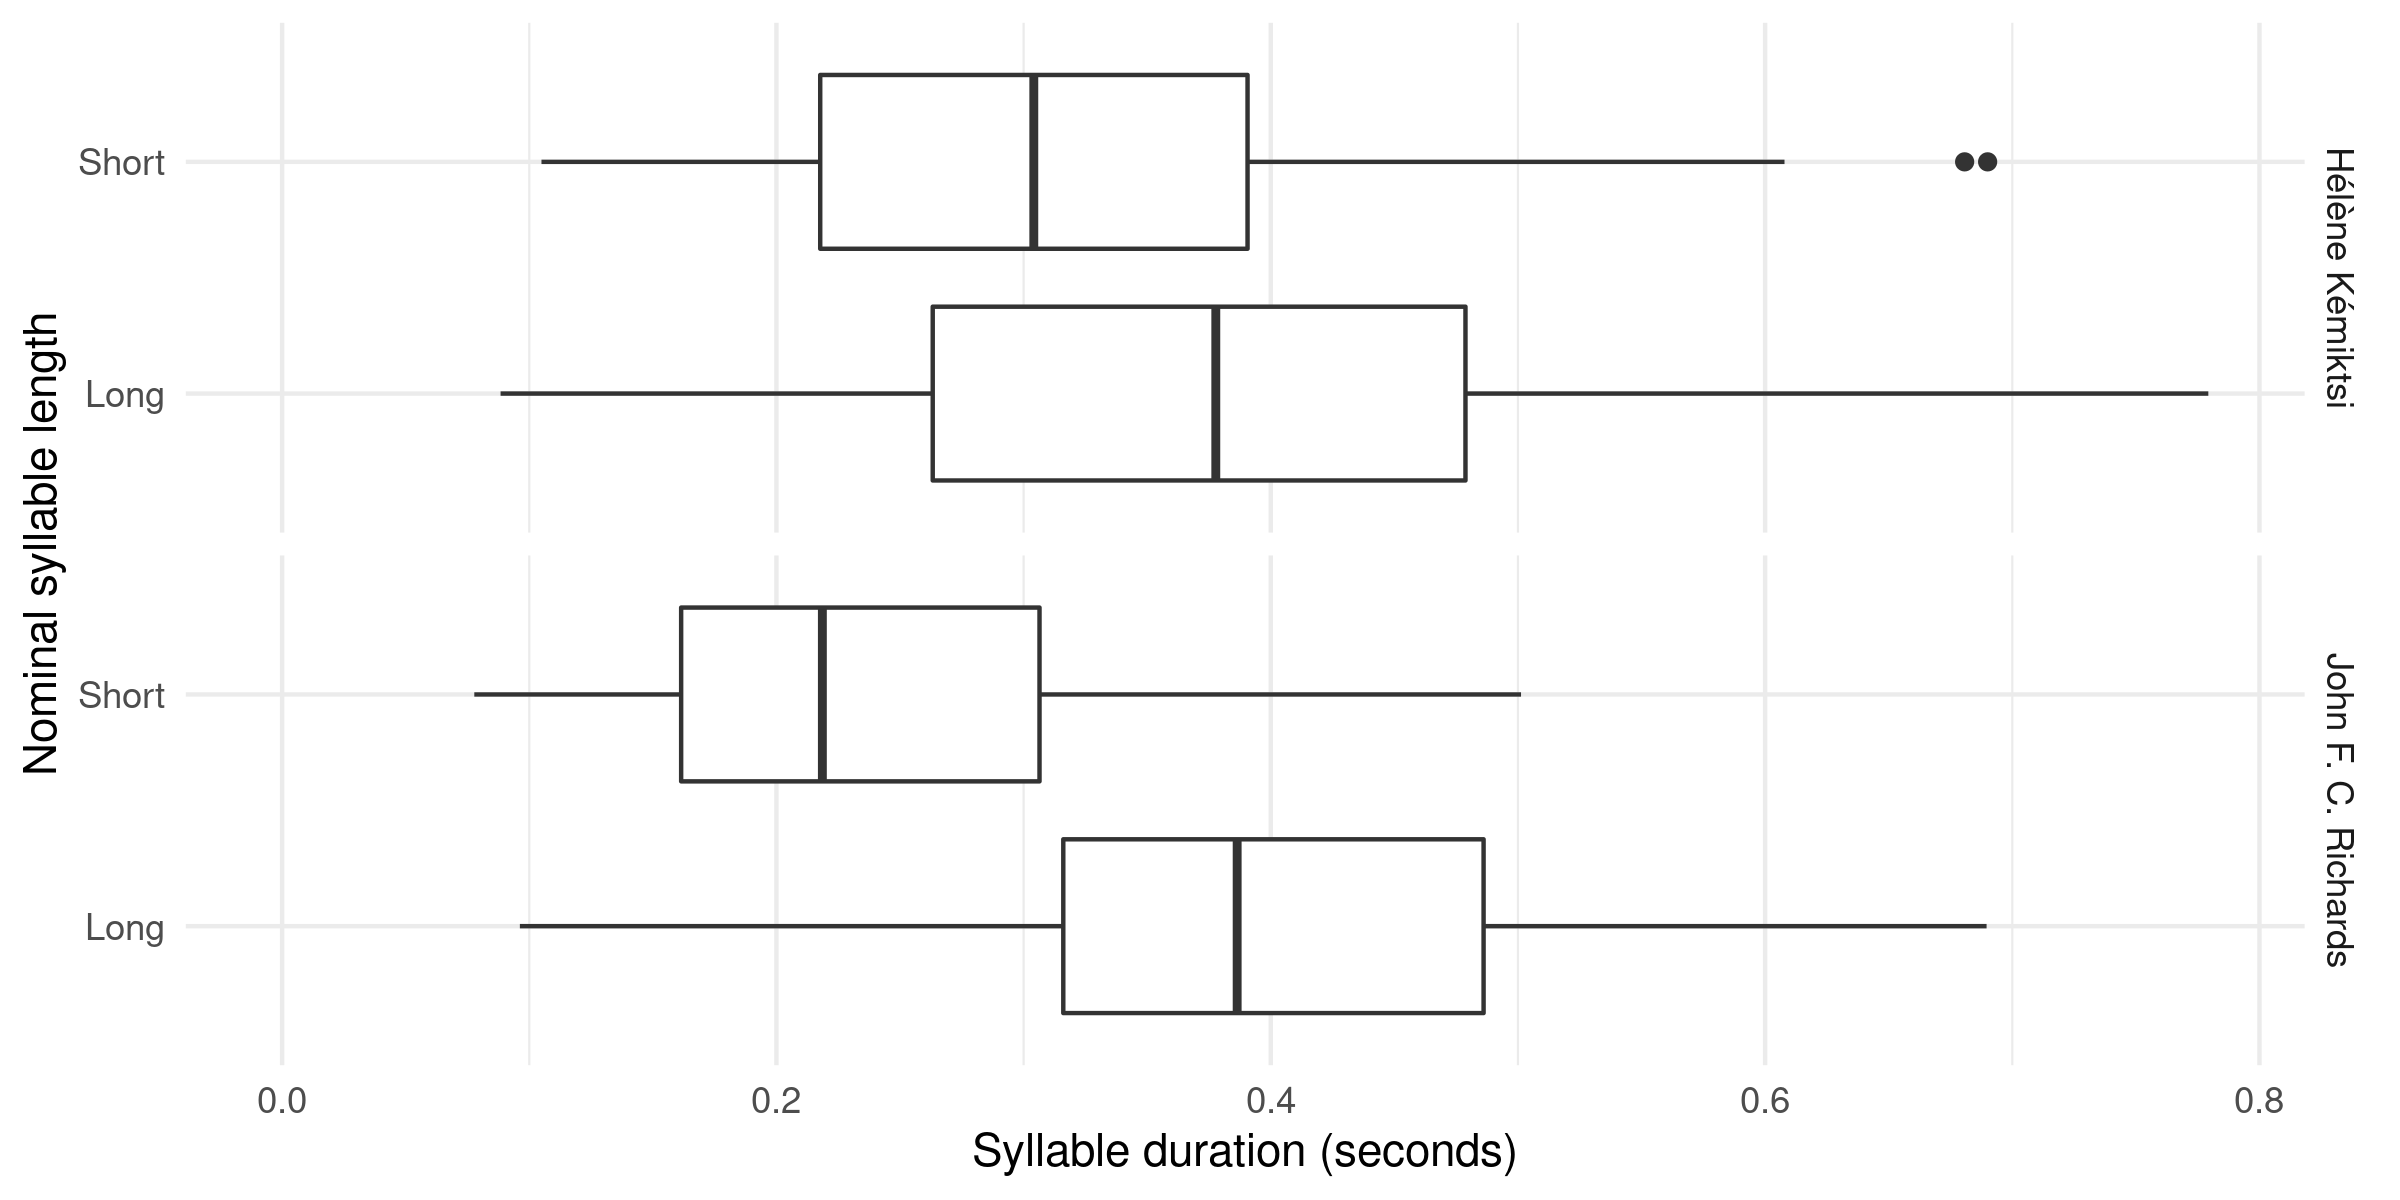 Boxplot showing the distribution of syllable for long and short syllables and both Hélène Kémiktsi and John F. C. Richards